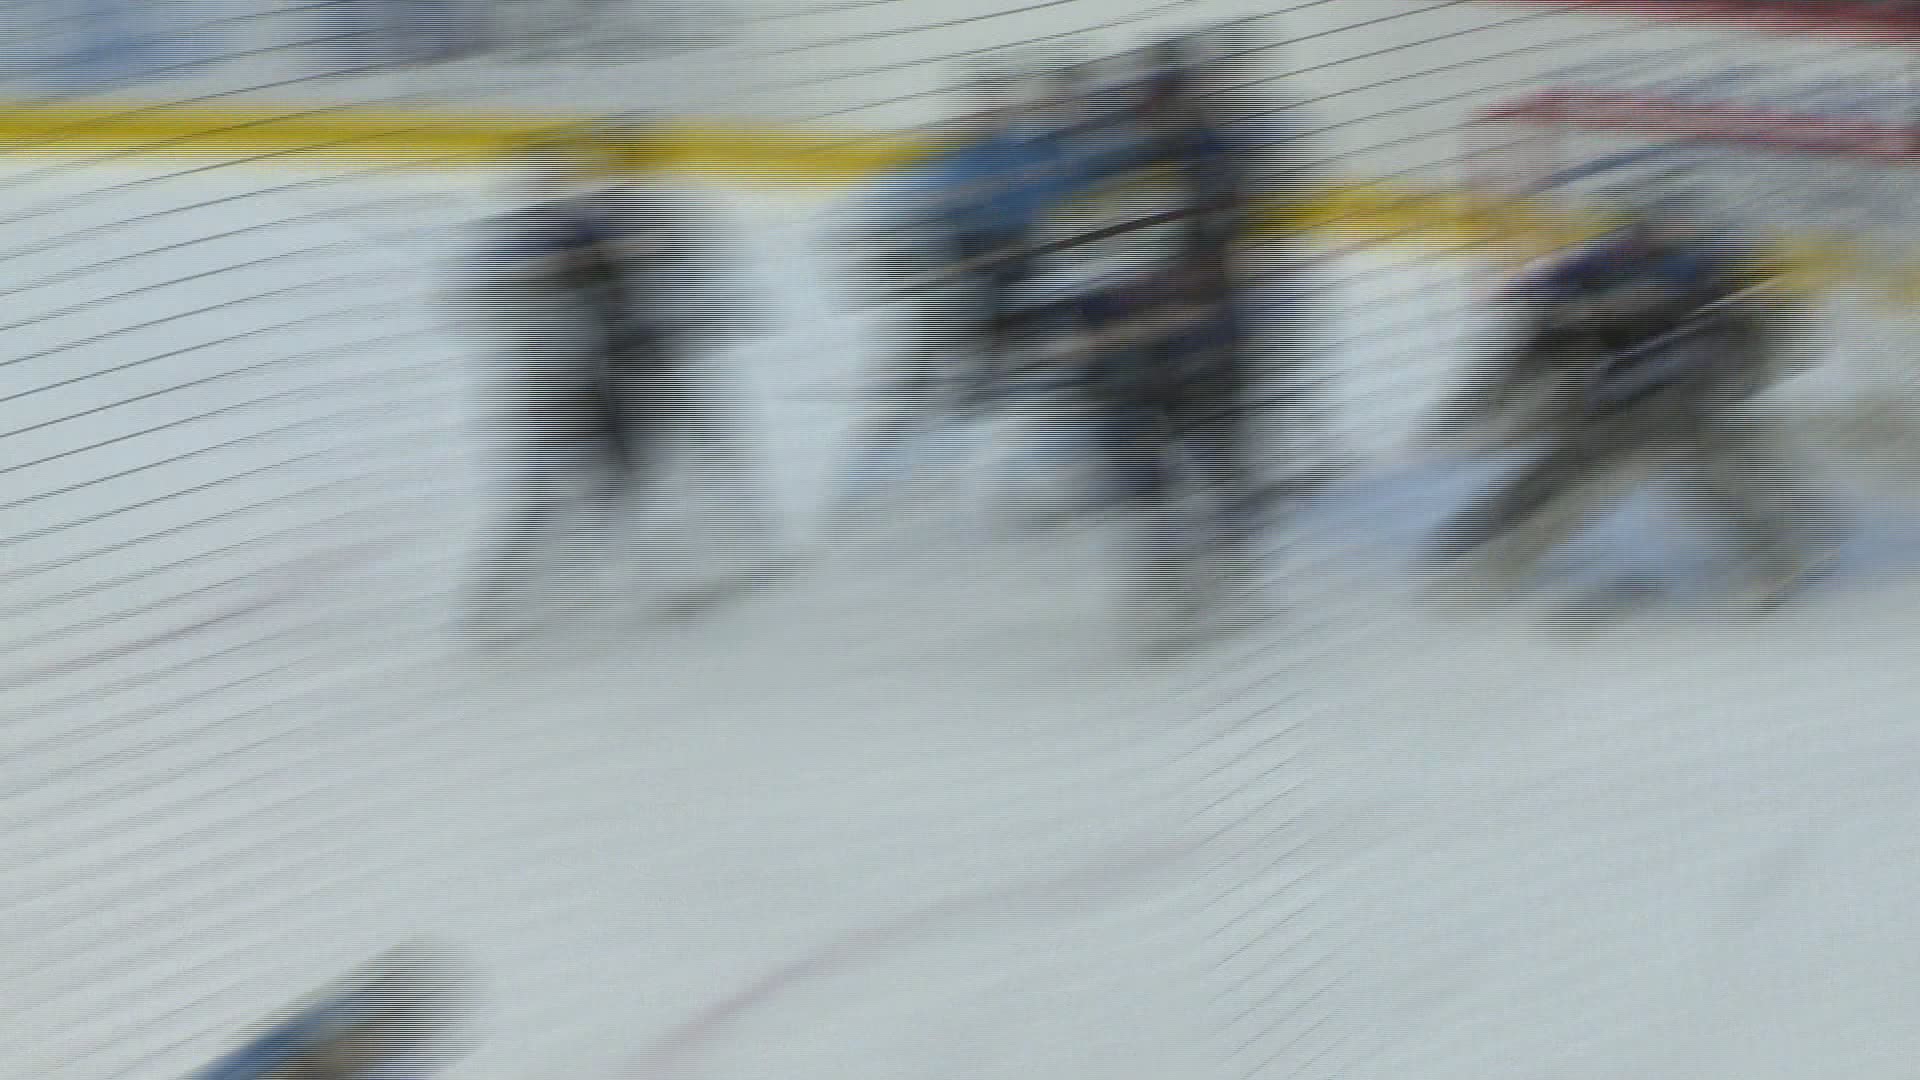 The inaugural NWHL season is capped off by Minnesota beating Buffalo in OT.